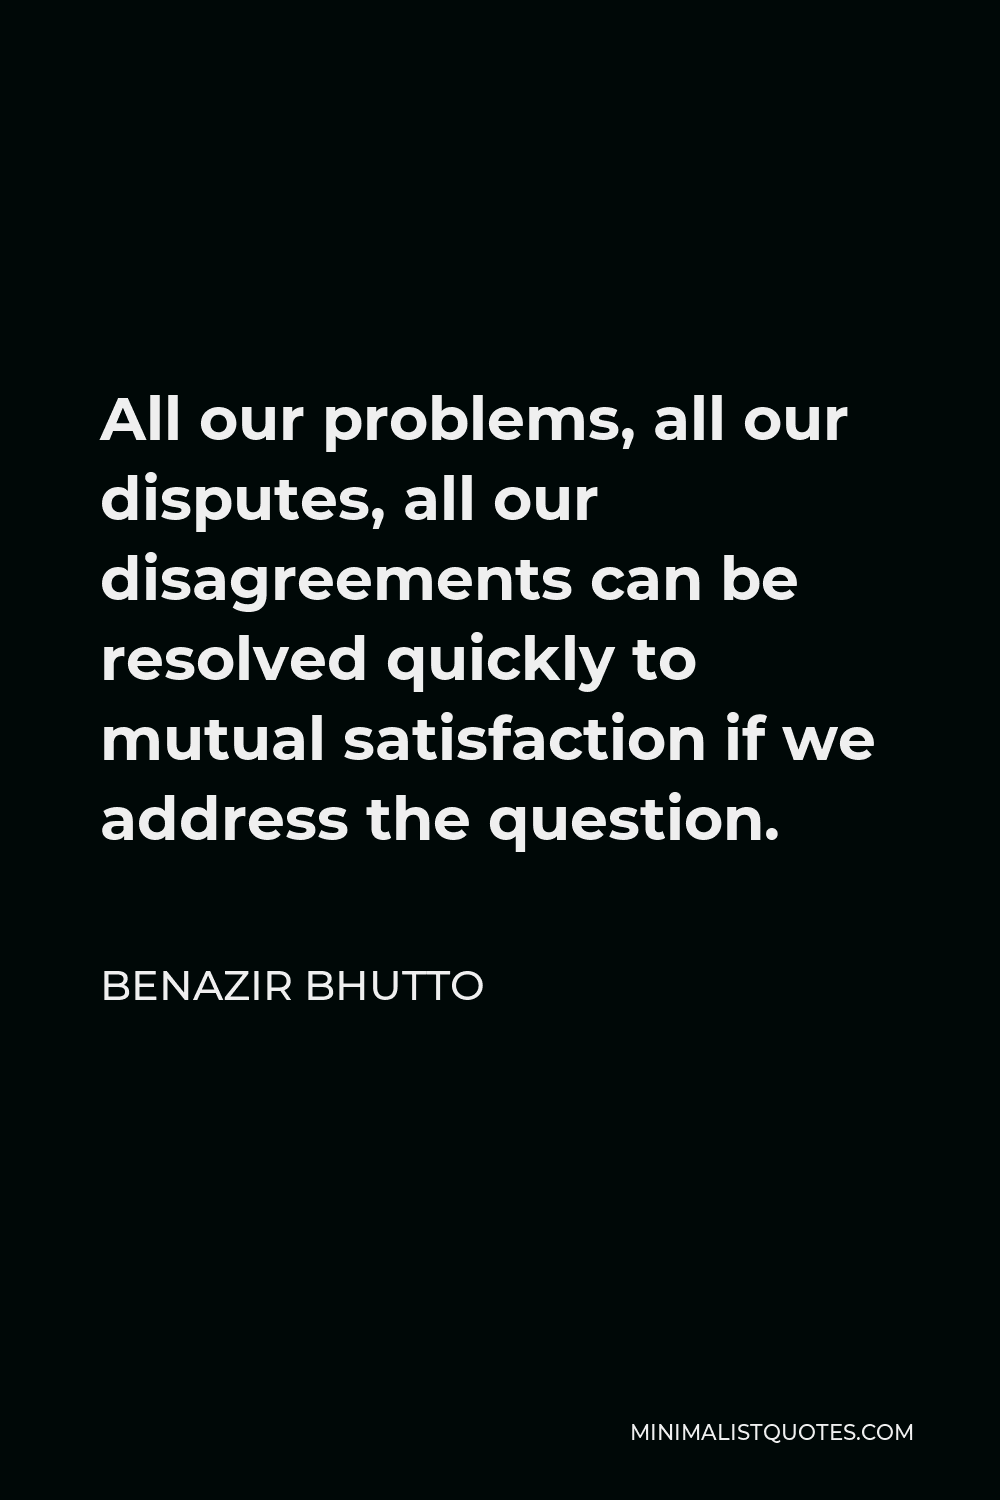 Benazir Bhutto Quote - All our problems, all our disputes, all our disagreements can be resolved quickly to mutual satisfaction if we address the question.